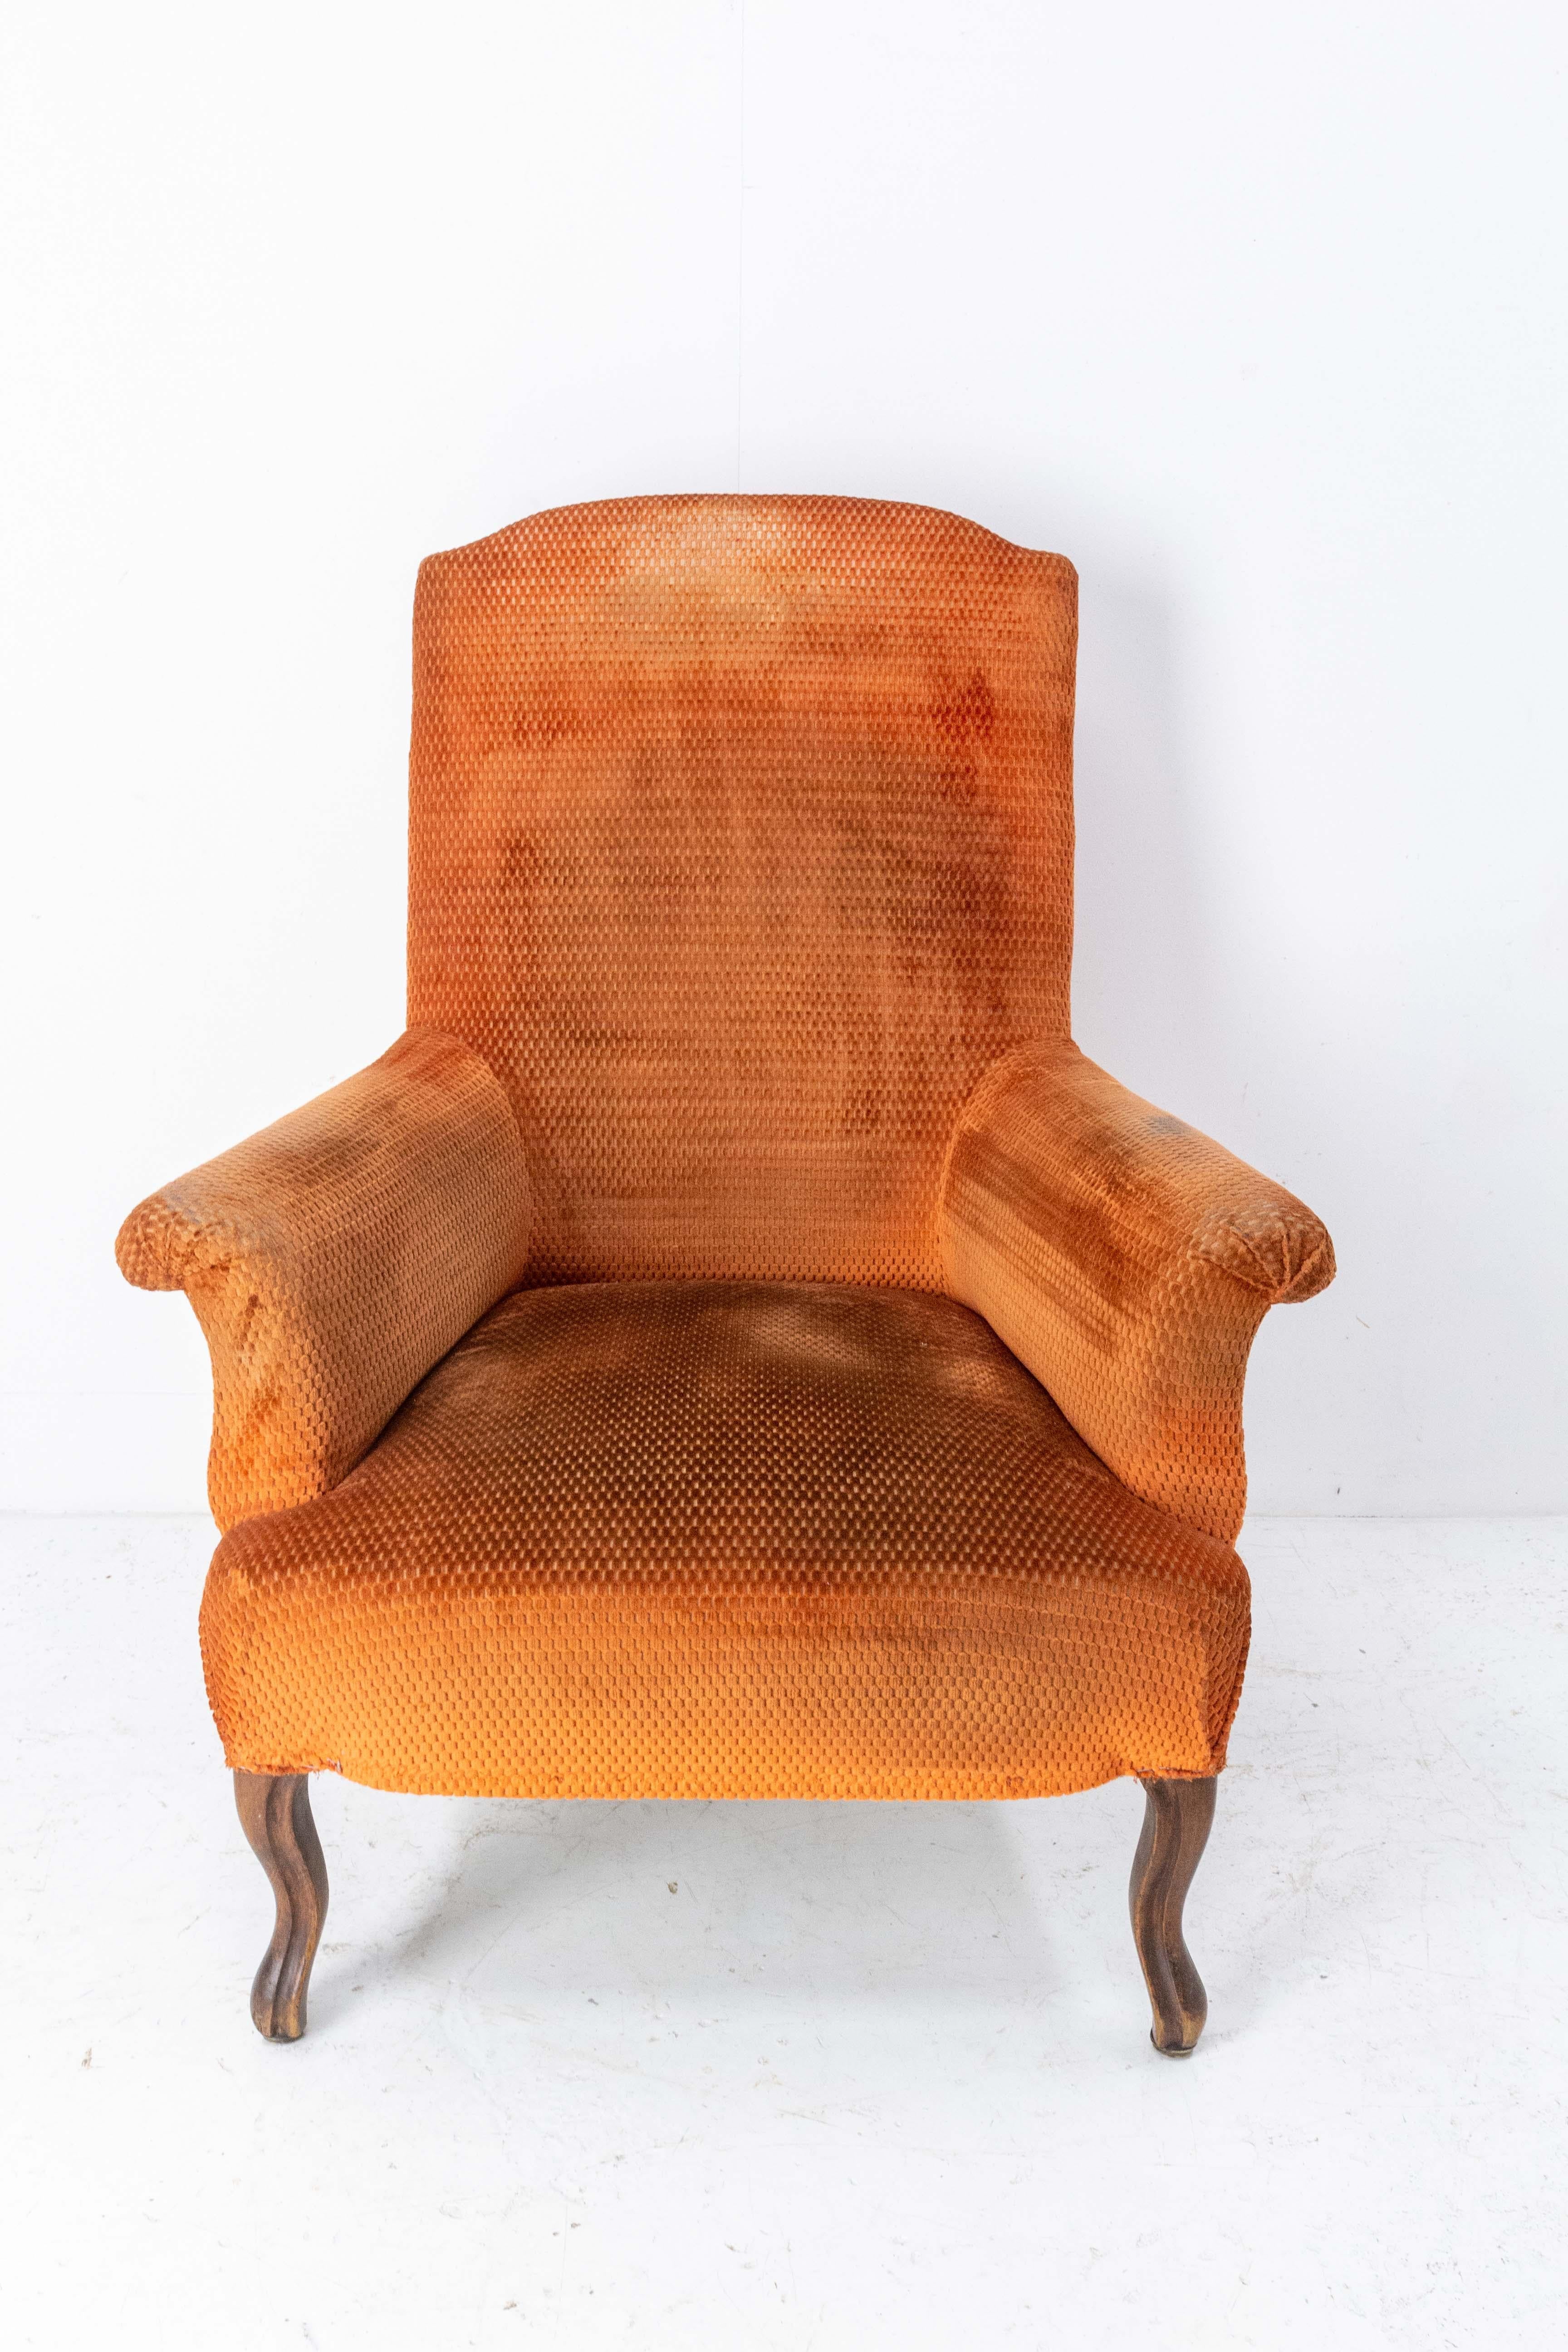 Fauteuil armchair French Napoleon III, circa 1880
Antique, 19th century,
Sound and solid 
to be recovered
Very comfortable.

Shipping:
L76 P75 H96 19,3 kg.
 